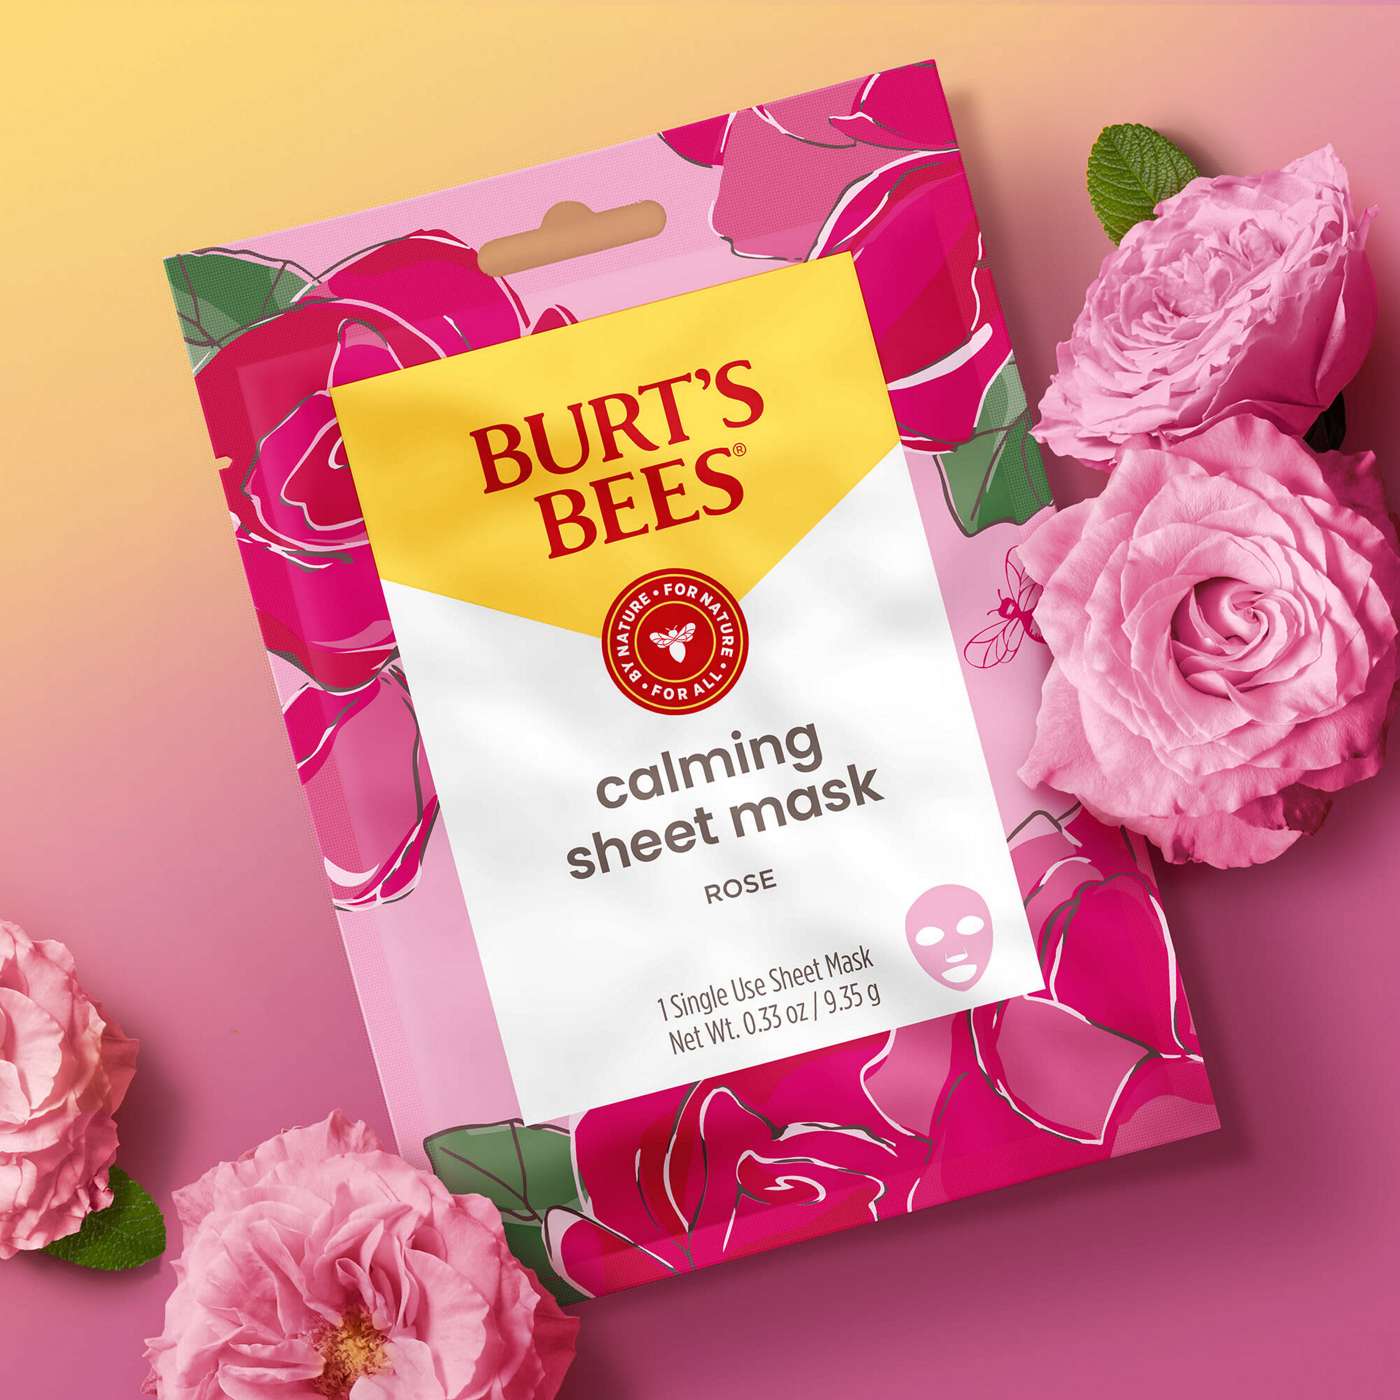 Burt's Bees Calming Sheet Mask with Rose; image 4 of 7